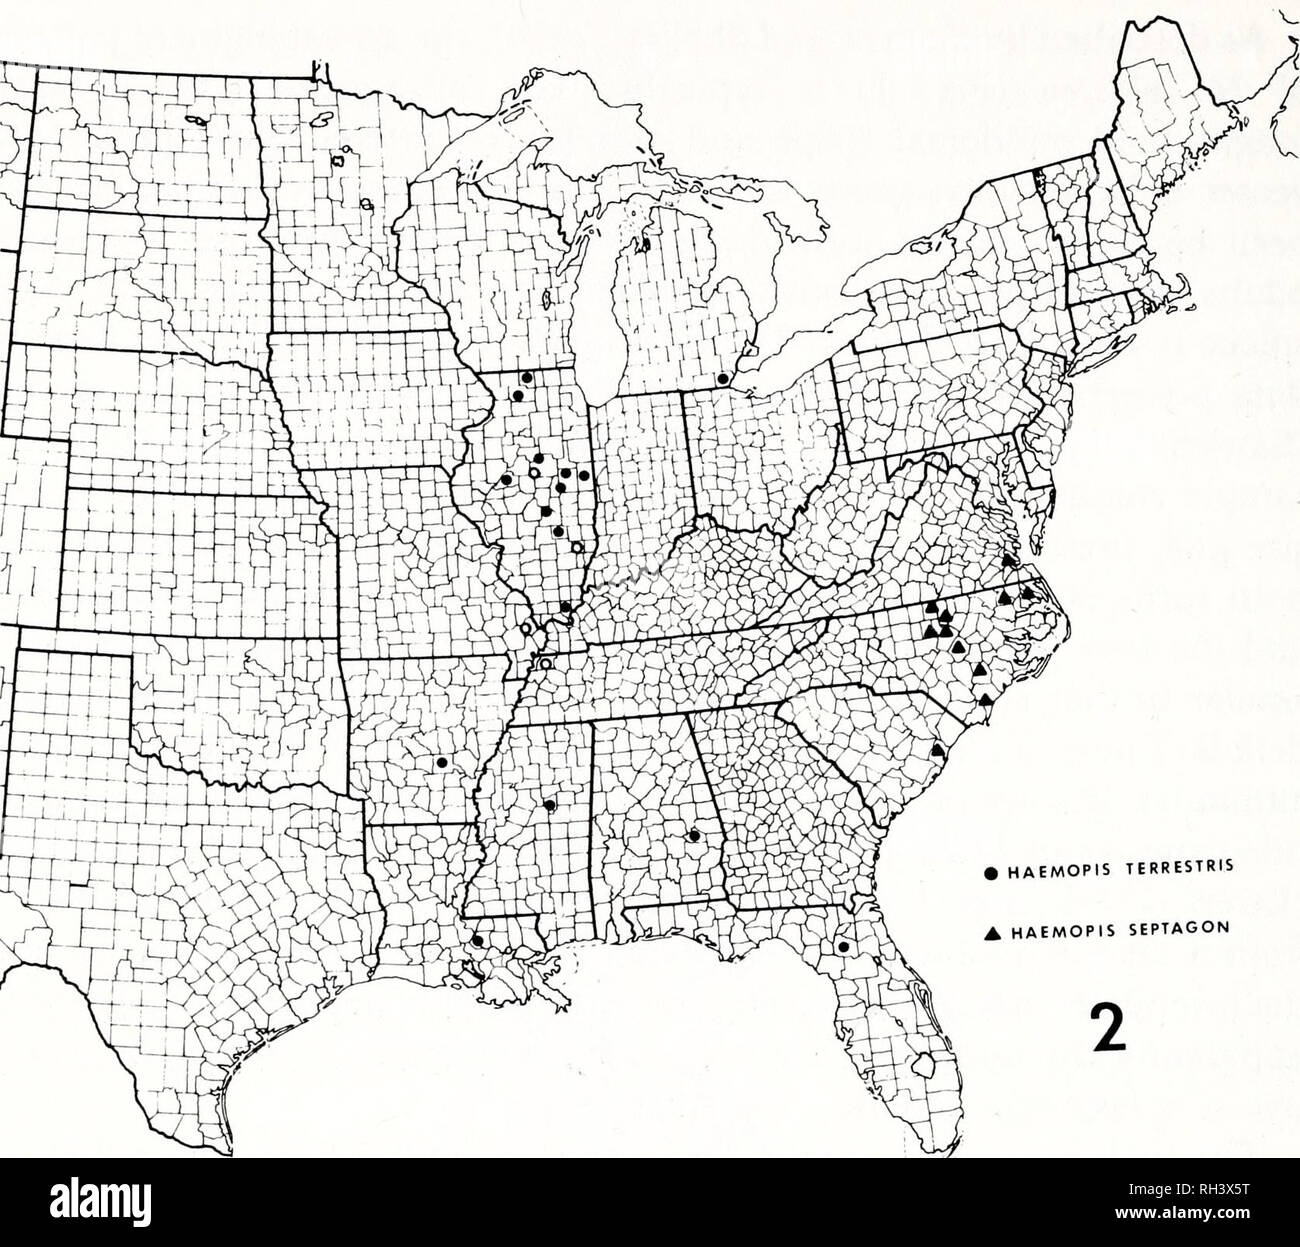 . Brimleyana. Zoology; Ecology; Natural history. 132 Rowland M. Shelley, Alvin L. Braswell, David Stephan. HAEMOPIS TERRESTRIS HAEMOPIS SEPTAGON Fig. 2. Distribution of the terrestrial leeches of the United States, taken in part from Sawyer (1972) and Sawyer and Shelley (1976). Each circle represents a single collecting locality except for those sites occurring close together, which are represented by one symbol. Open circles are based on literature records believed to be valid. septagon; coupled with those listed by Sawyer and Shelley (1976) they in- dicate that the species is widespread in t Stock Photo